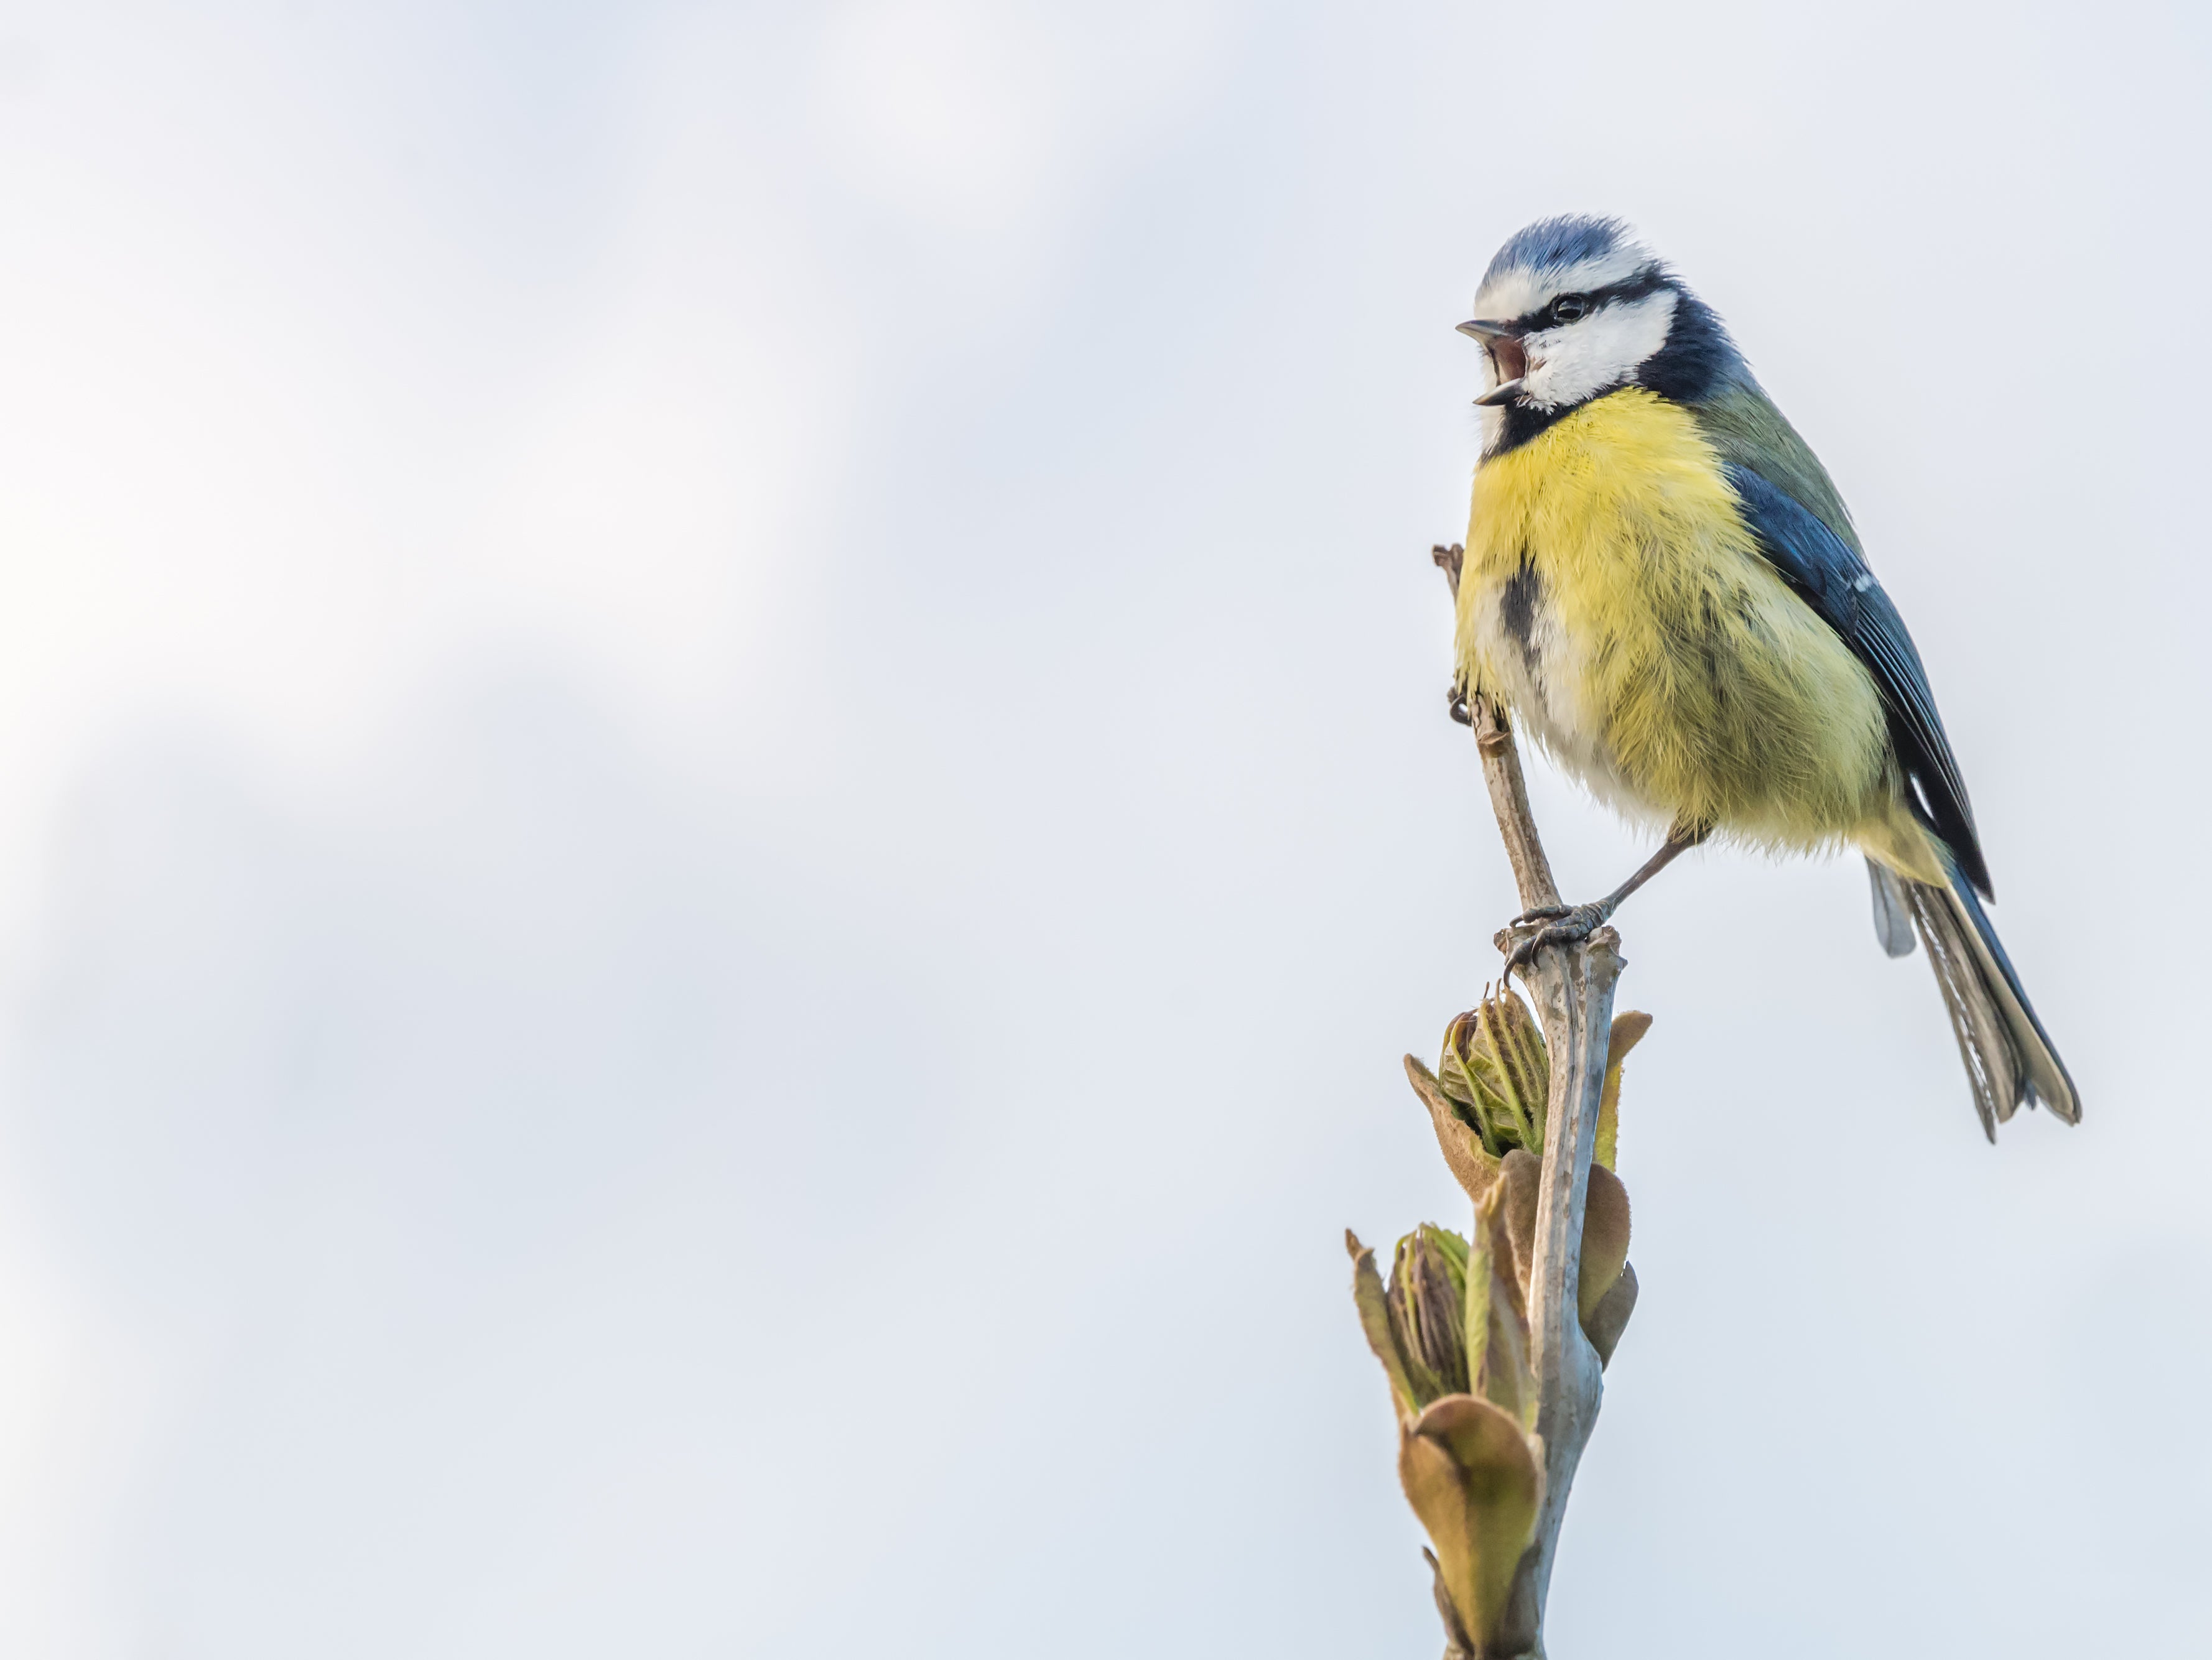 A blue tit in North Devon, England, in April. The bird is among 15 million in the UK, according to the RSPB, and instantly recognisable by its colours